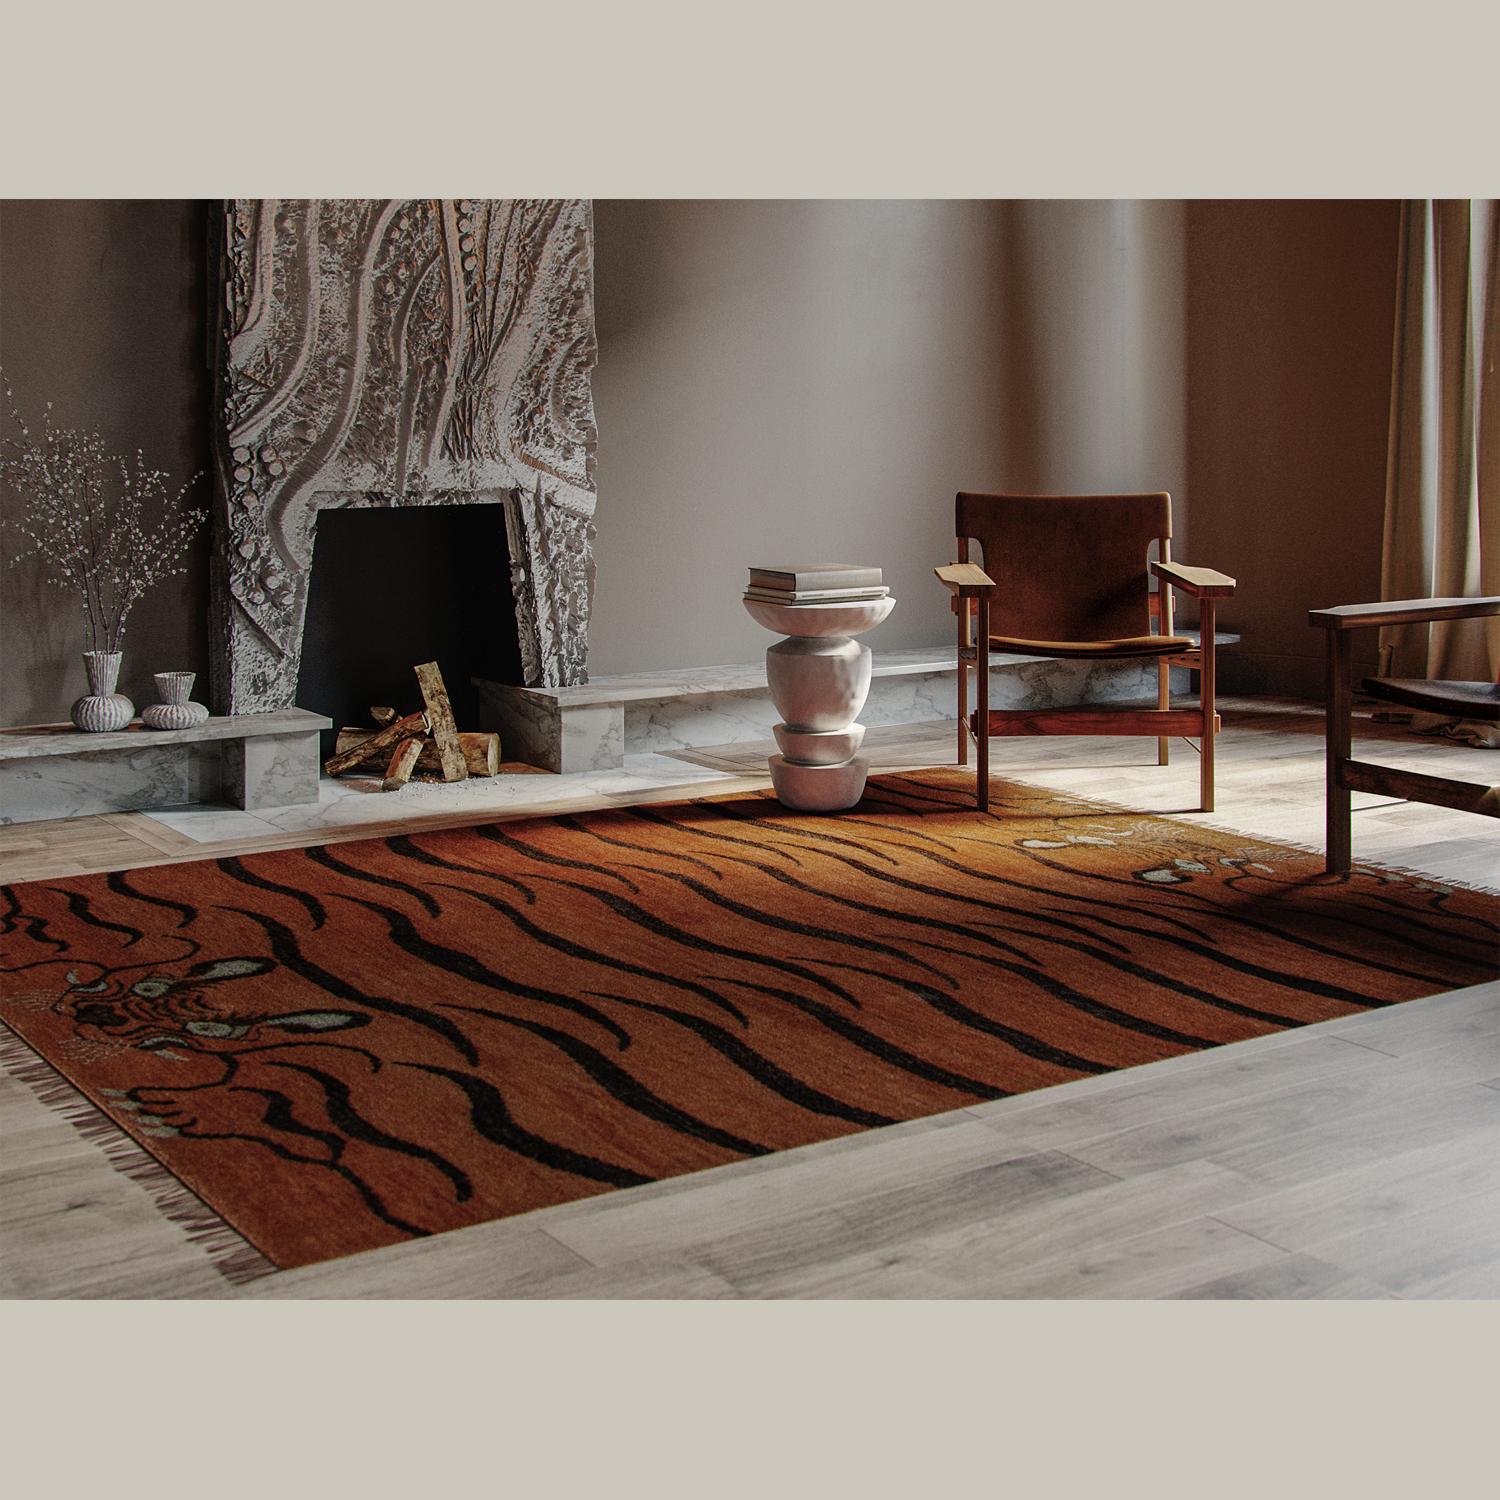 Wool “Kouang Tiala” Bespoke, Handknotted Rug by Christiane Lemieux For Sale